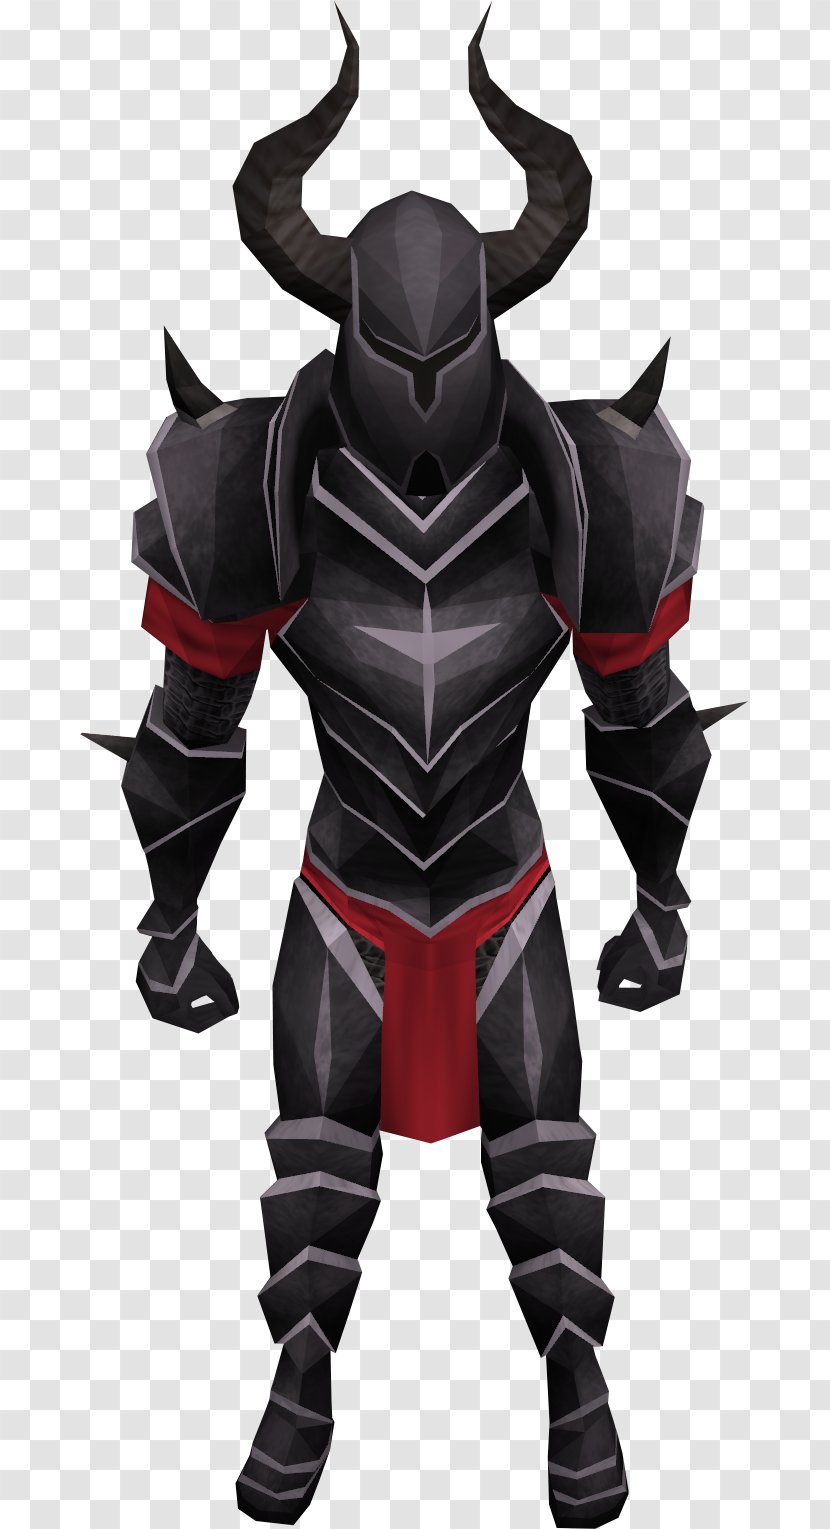 Black Knight Satellite Conspiracy Theory RuneScape Armour - Plate Transparent PNG